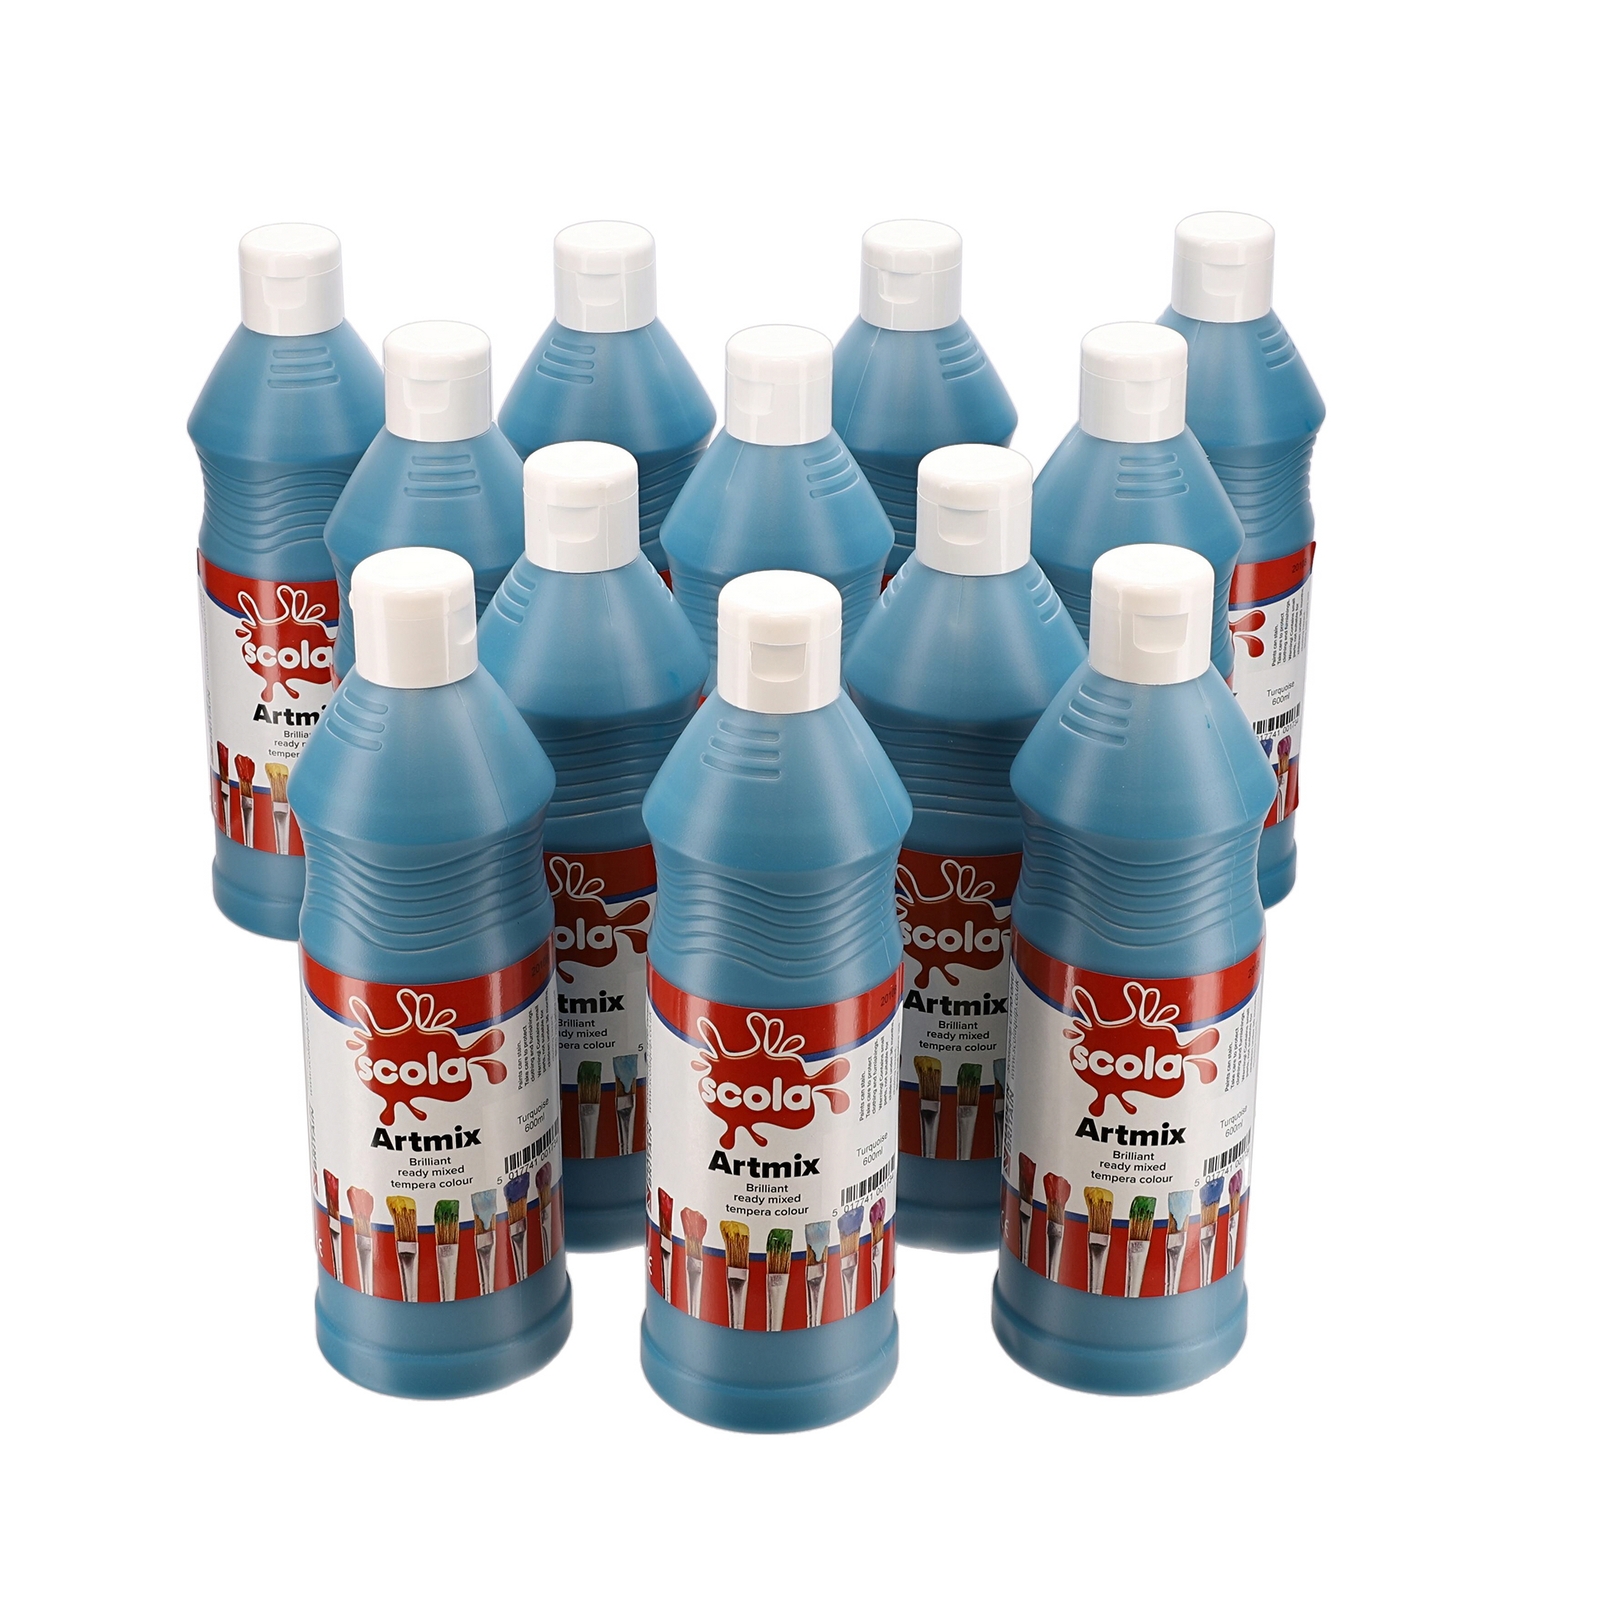 Scola Turquoise Artmix Ready Mixed Paint - 600ml - Pack of 12